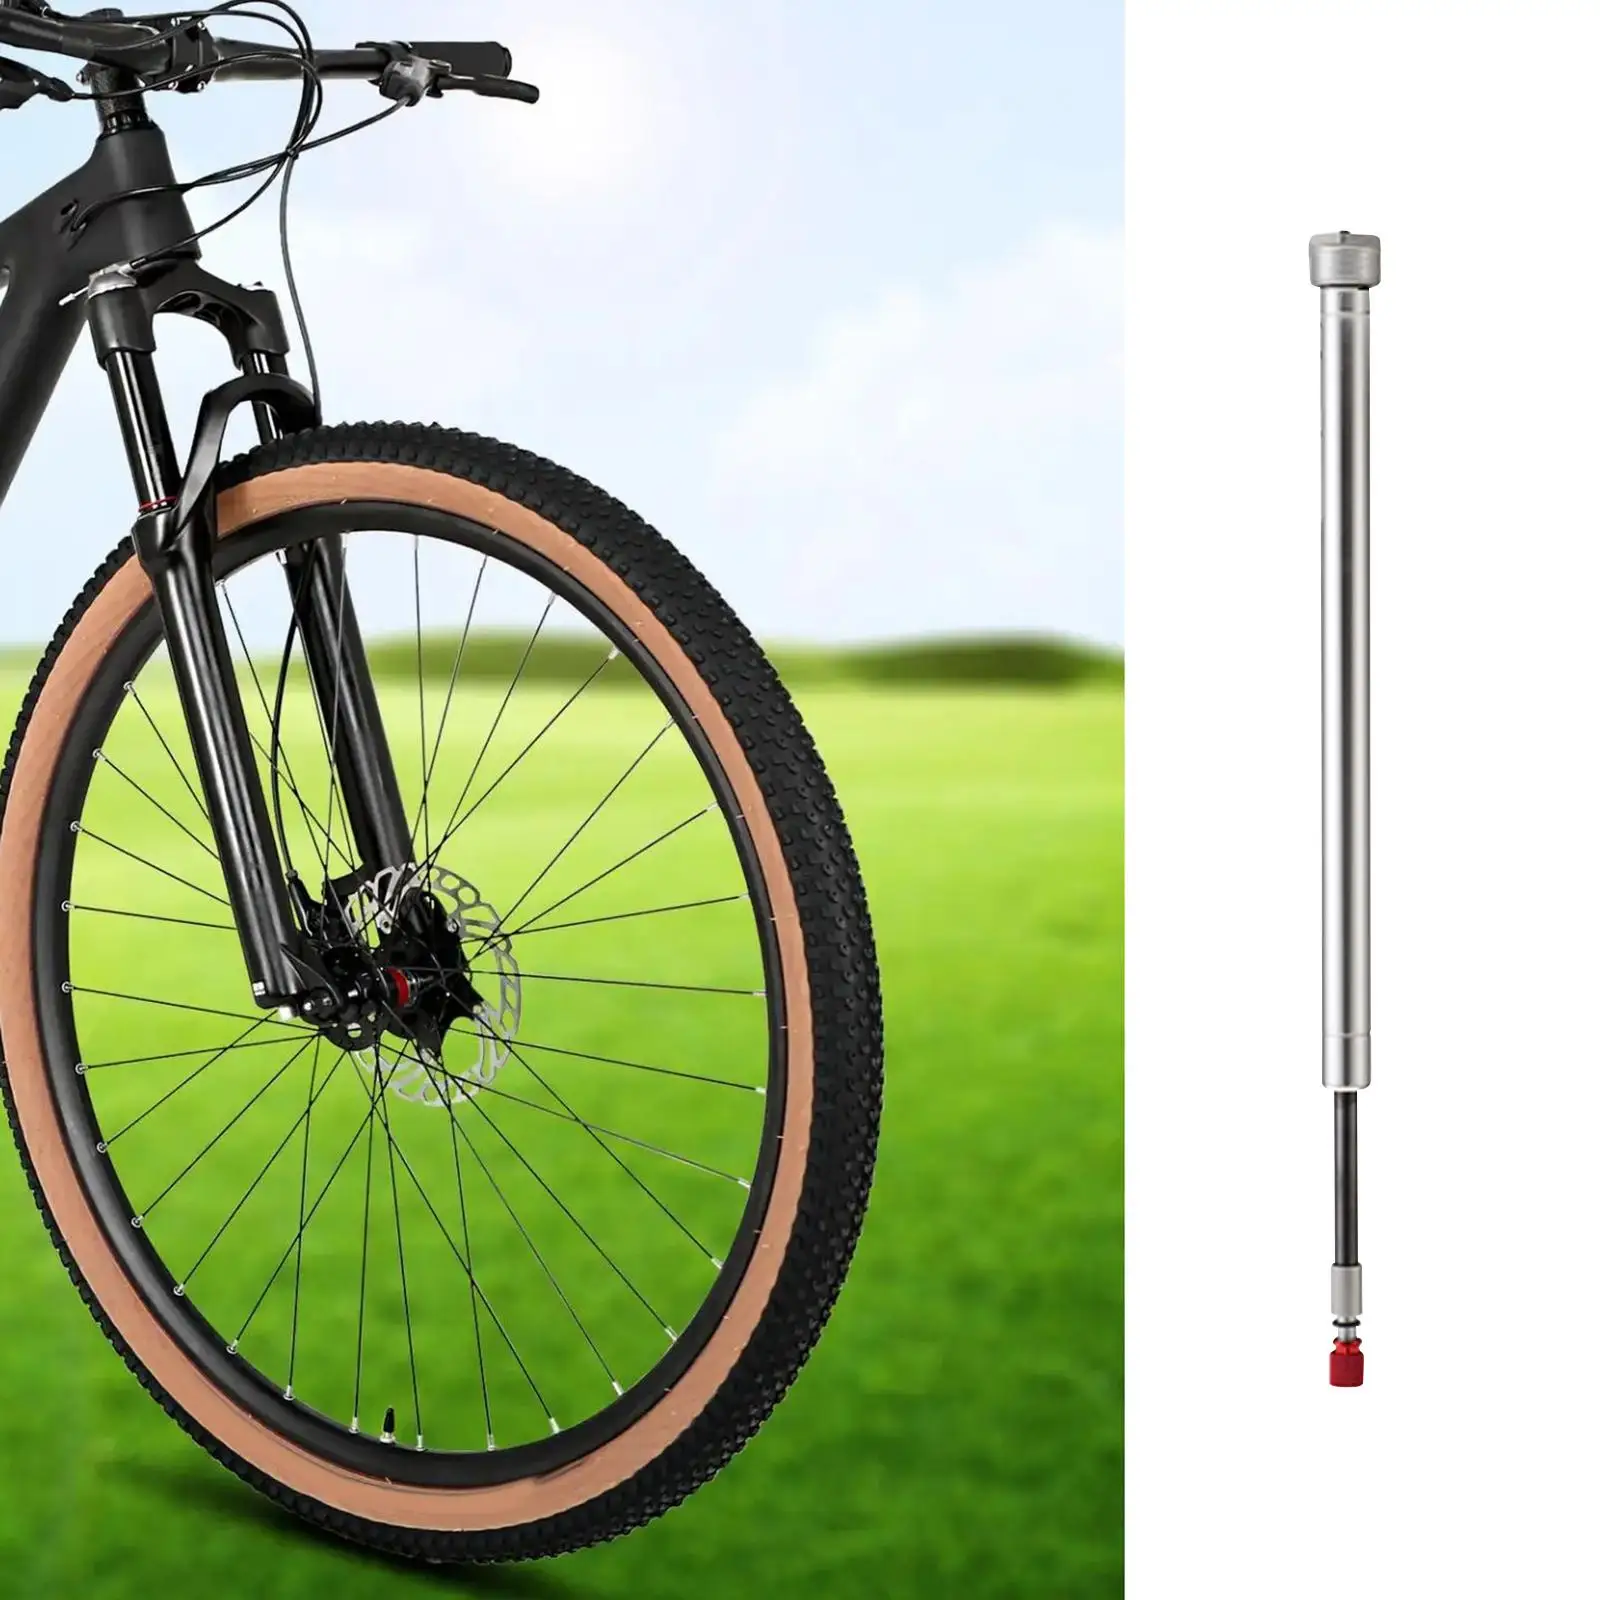 Front Fork Repair Rod Shoulder Control 32mm Durable Easy Installation Accessories Air Pneumatic Rod for Mountain Bike